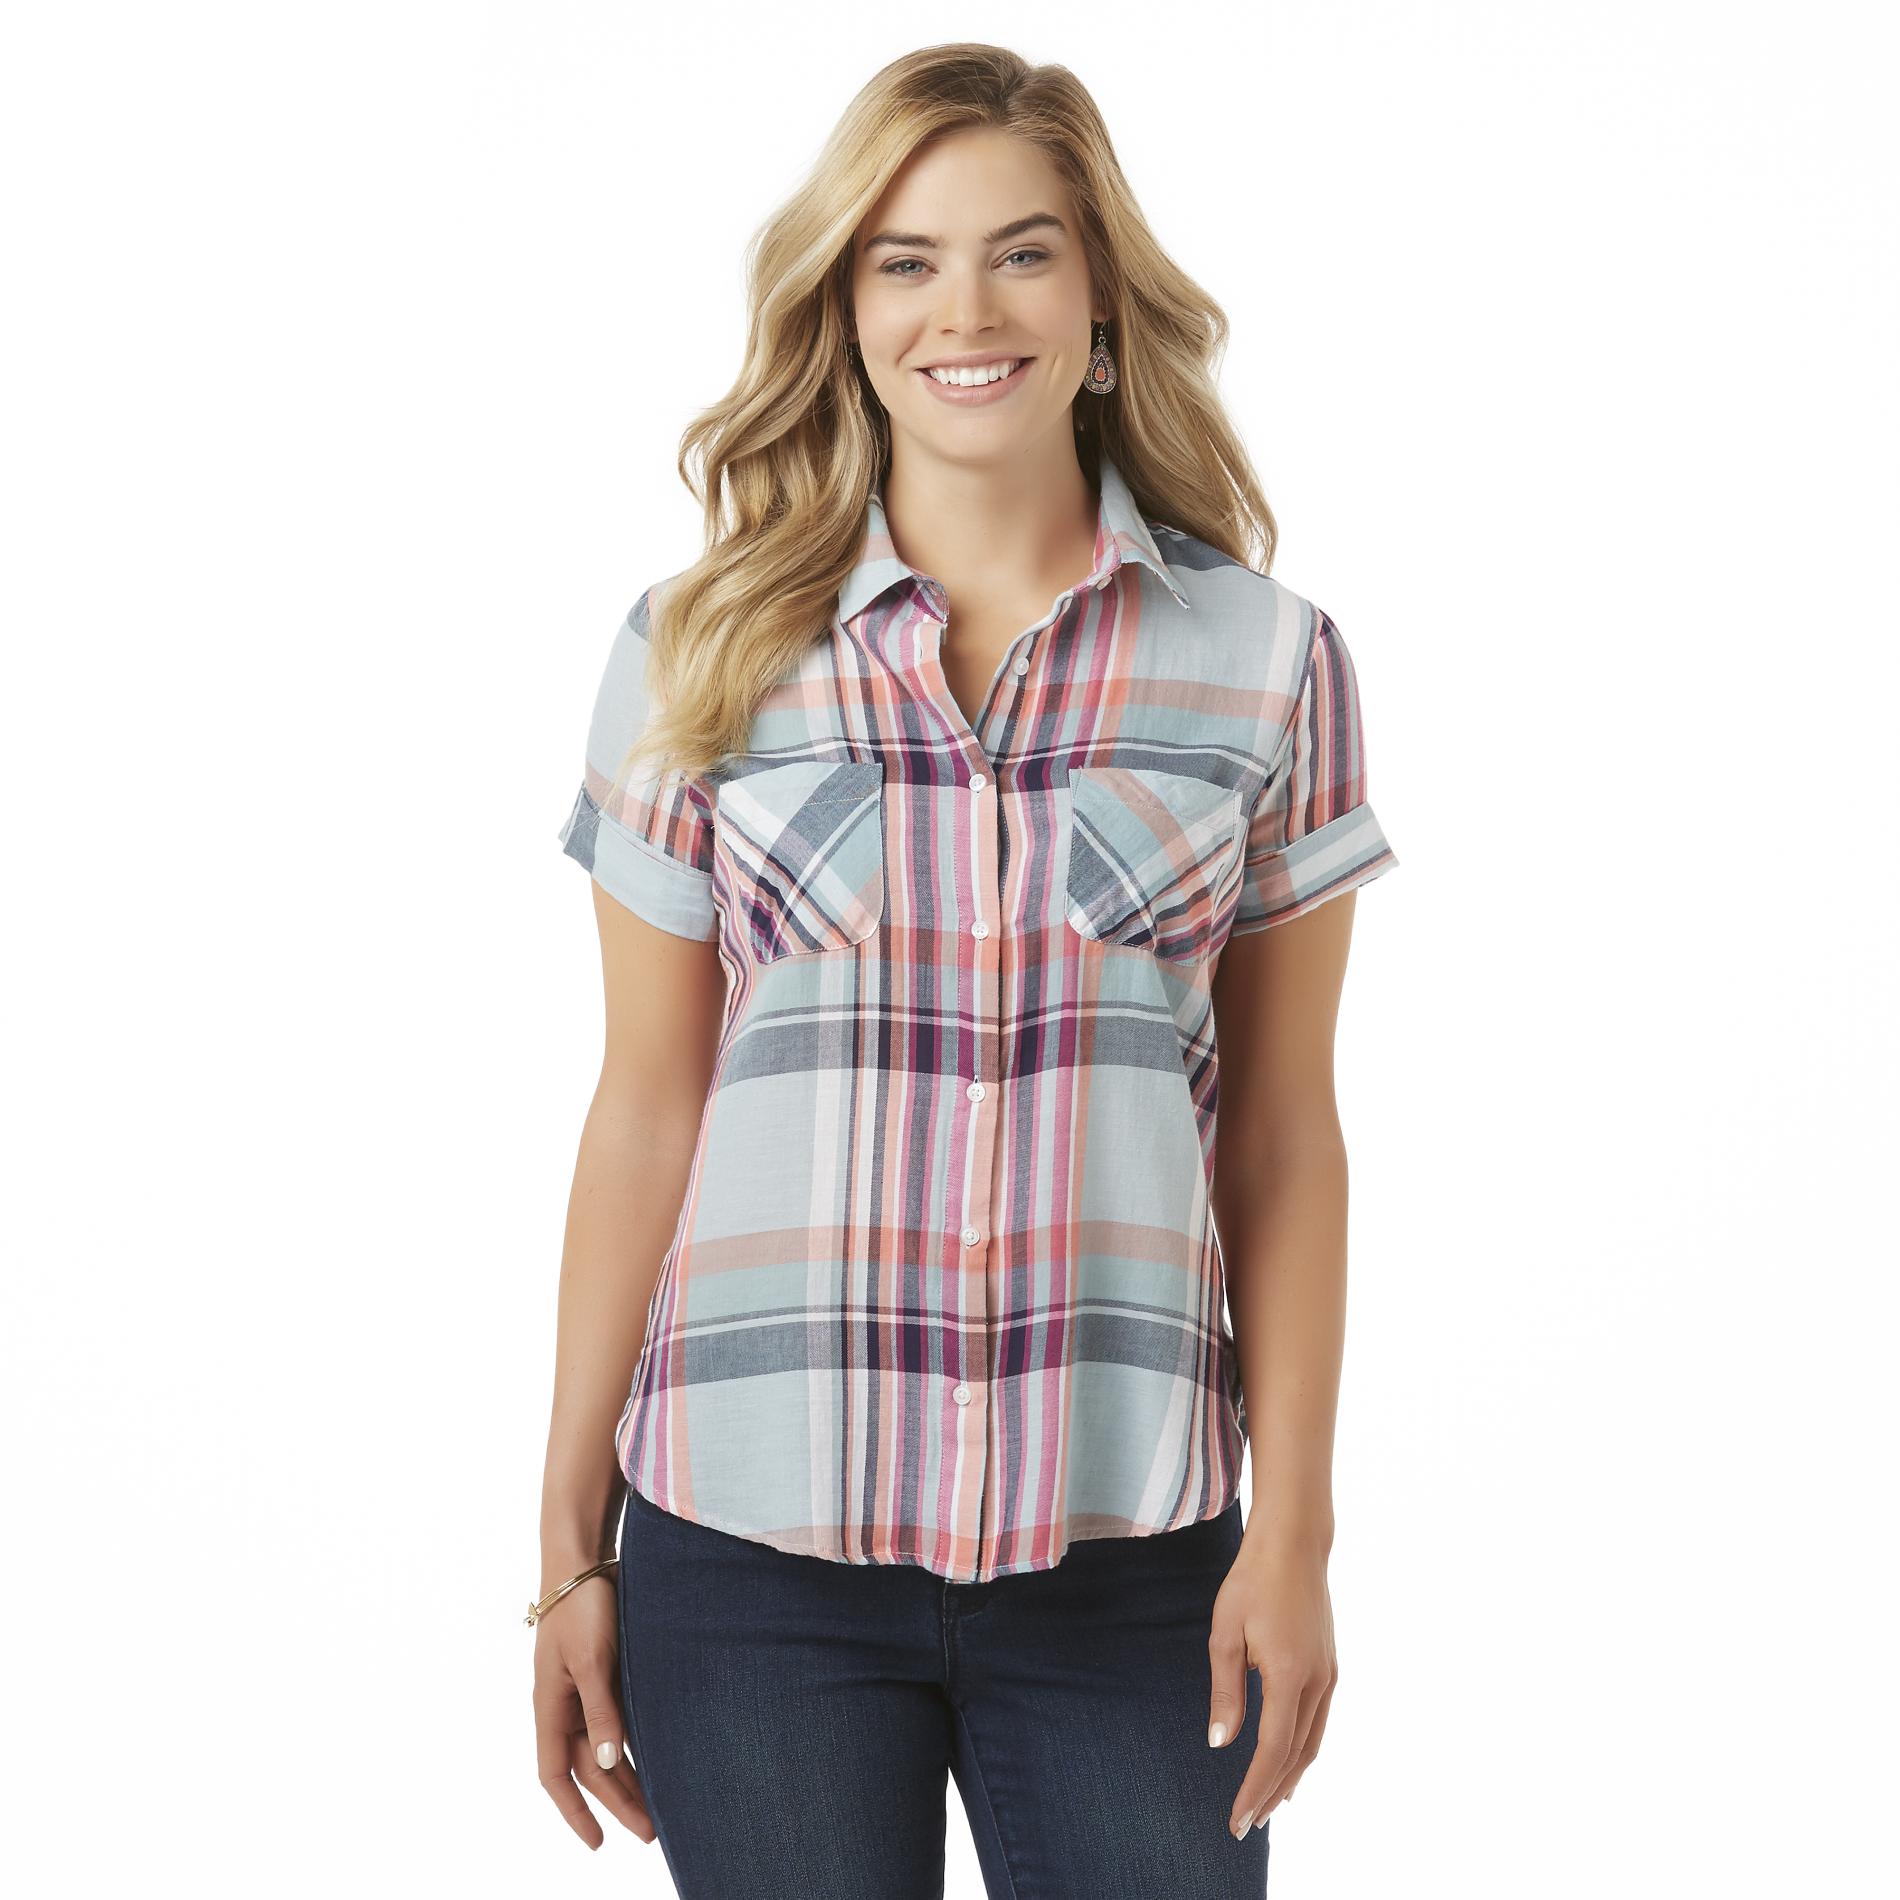 Simply Styled Women's Short-Sleeve Blouse - Plaid